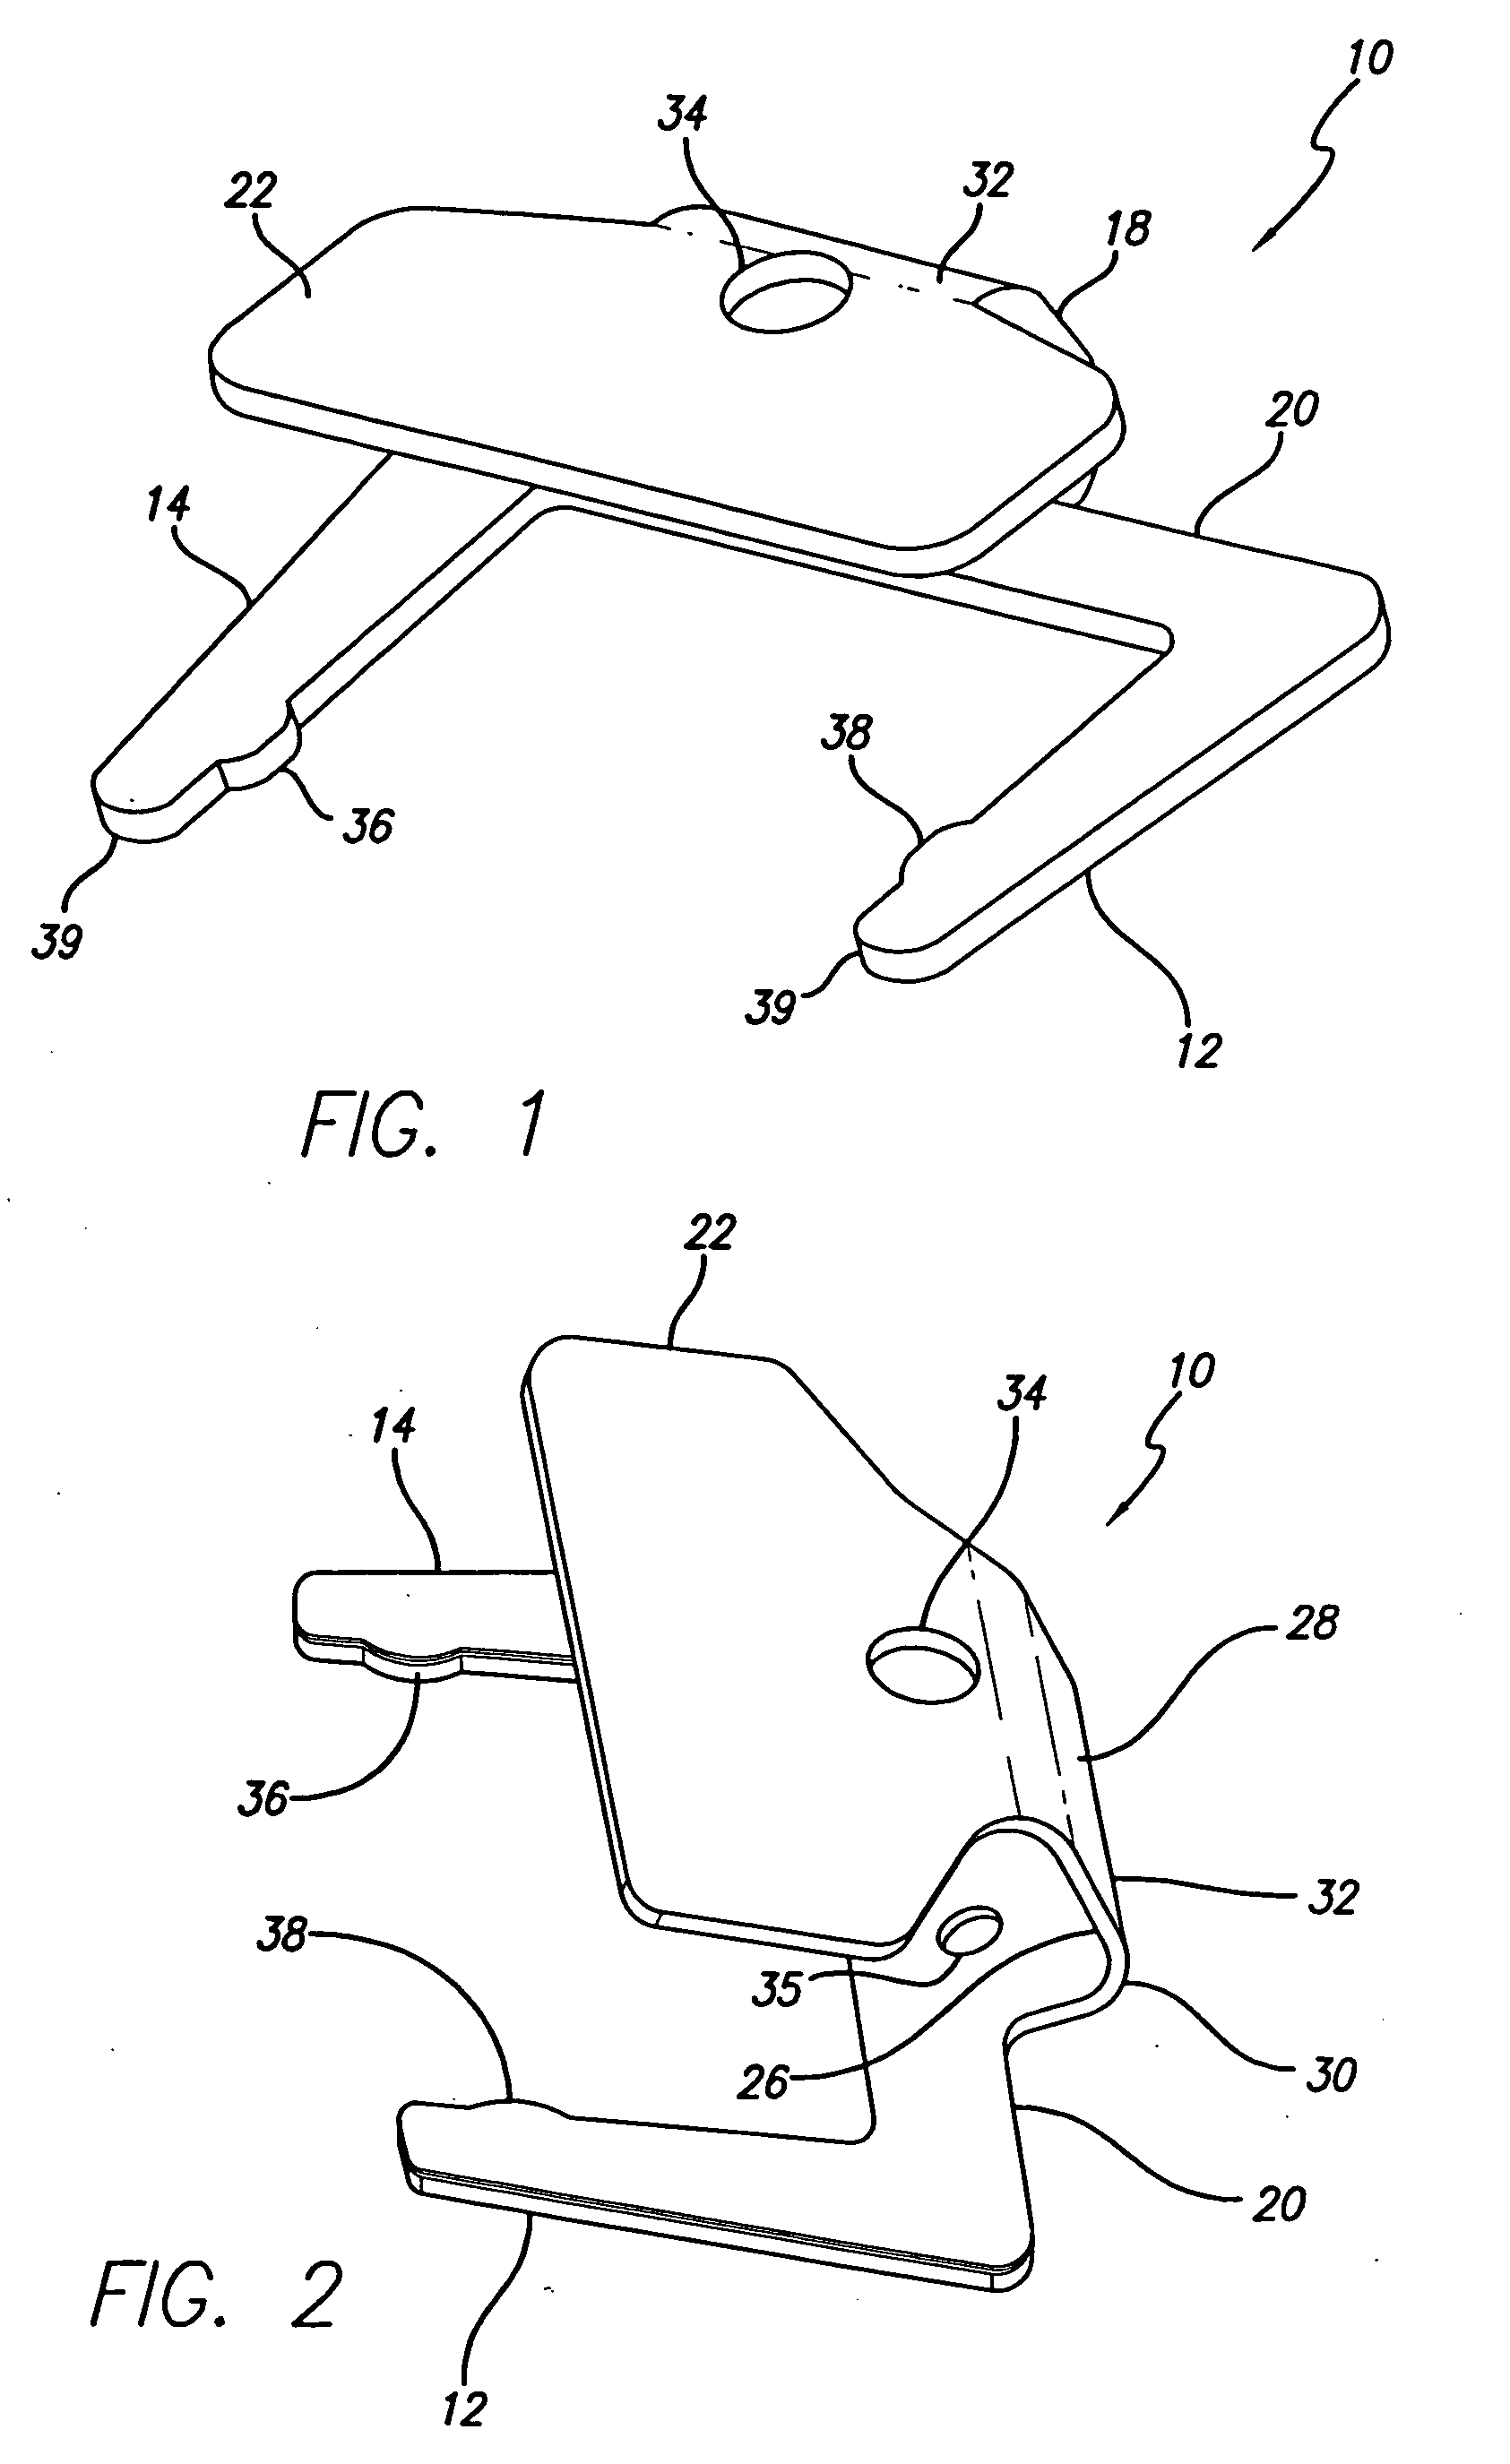 Low profile self-ligating bracket assembly and method of use